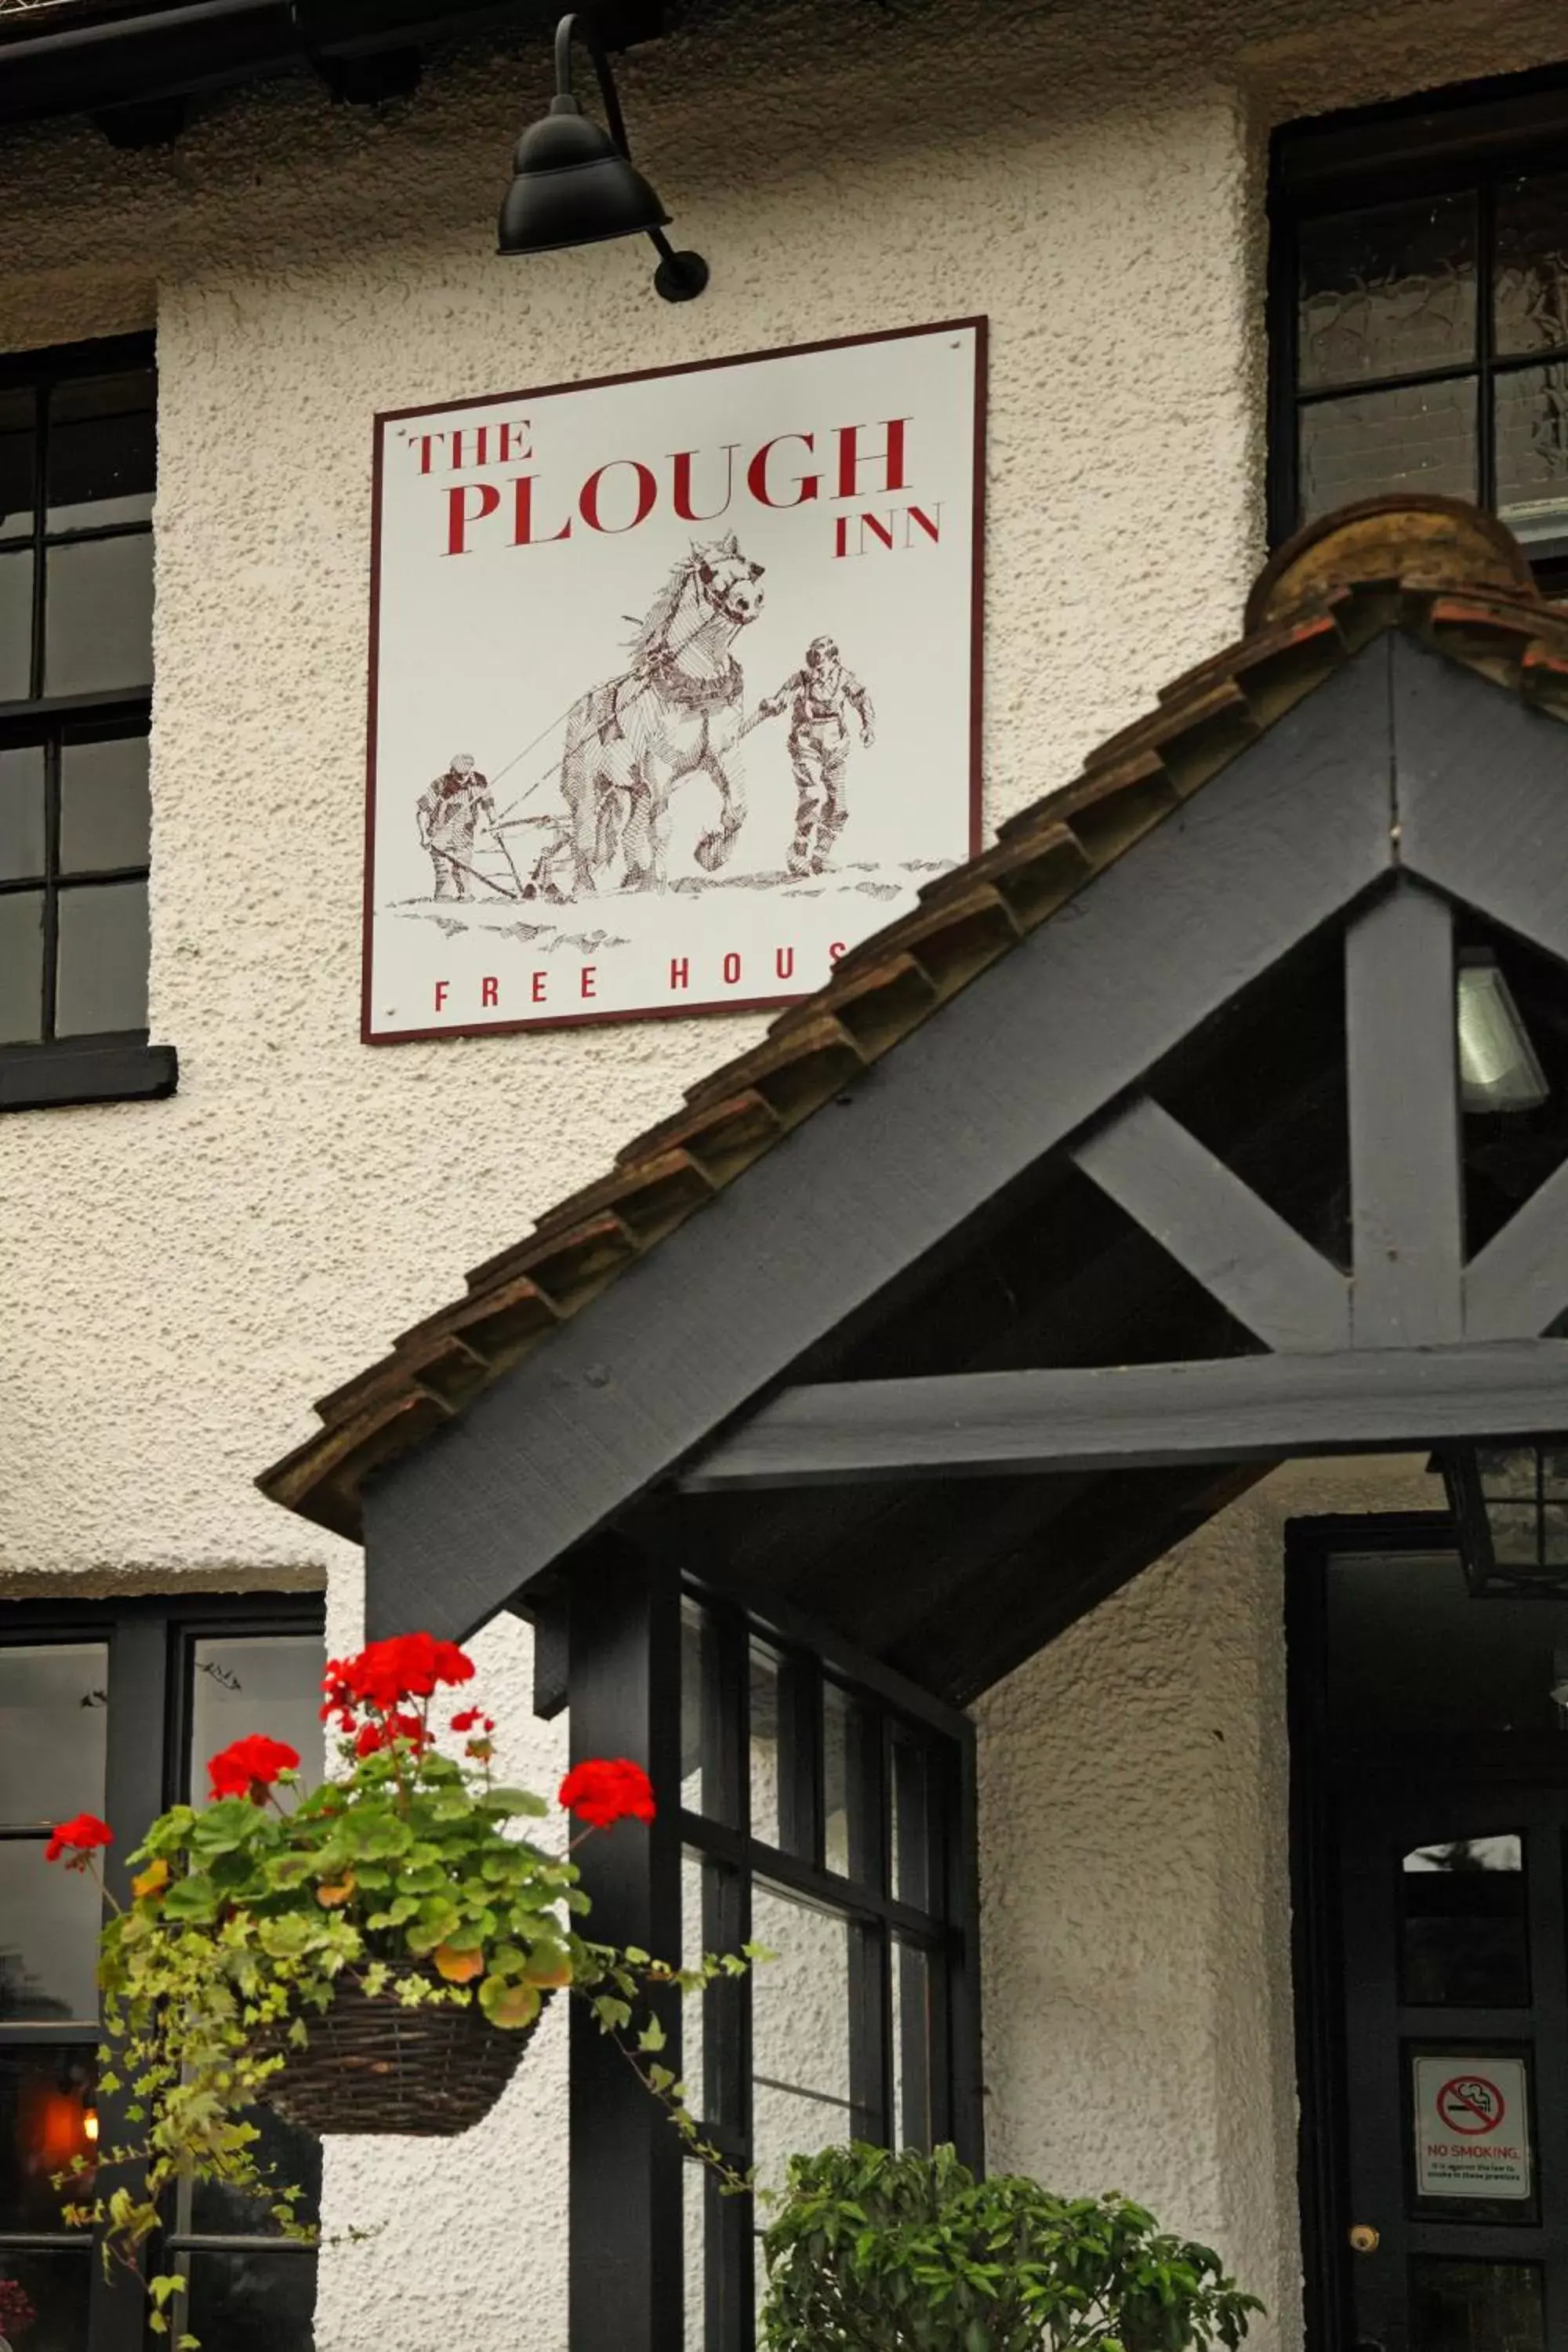 Spring, Property Building in The Plough Inn